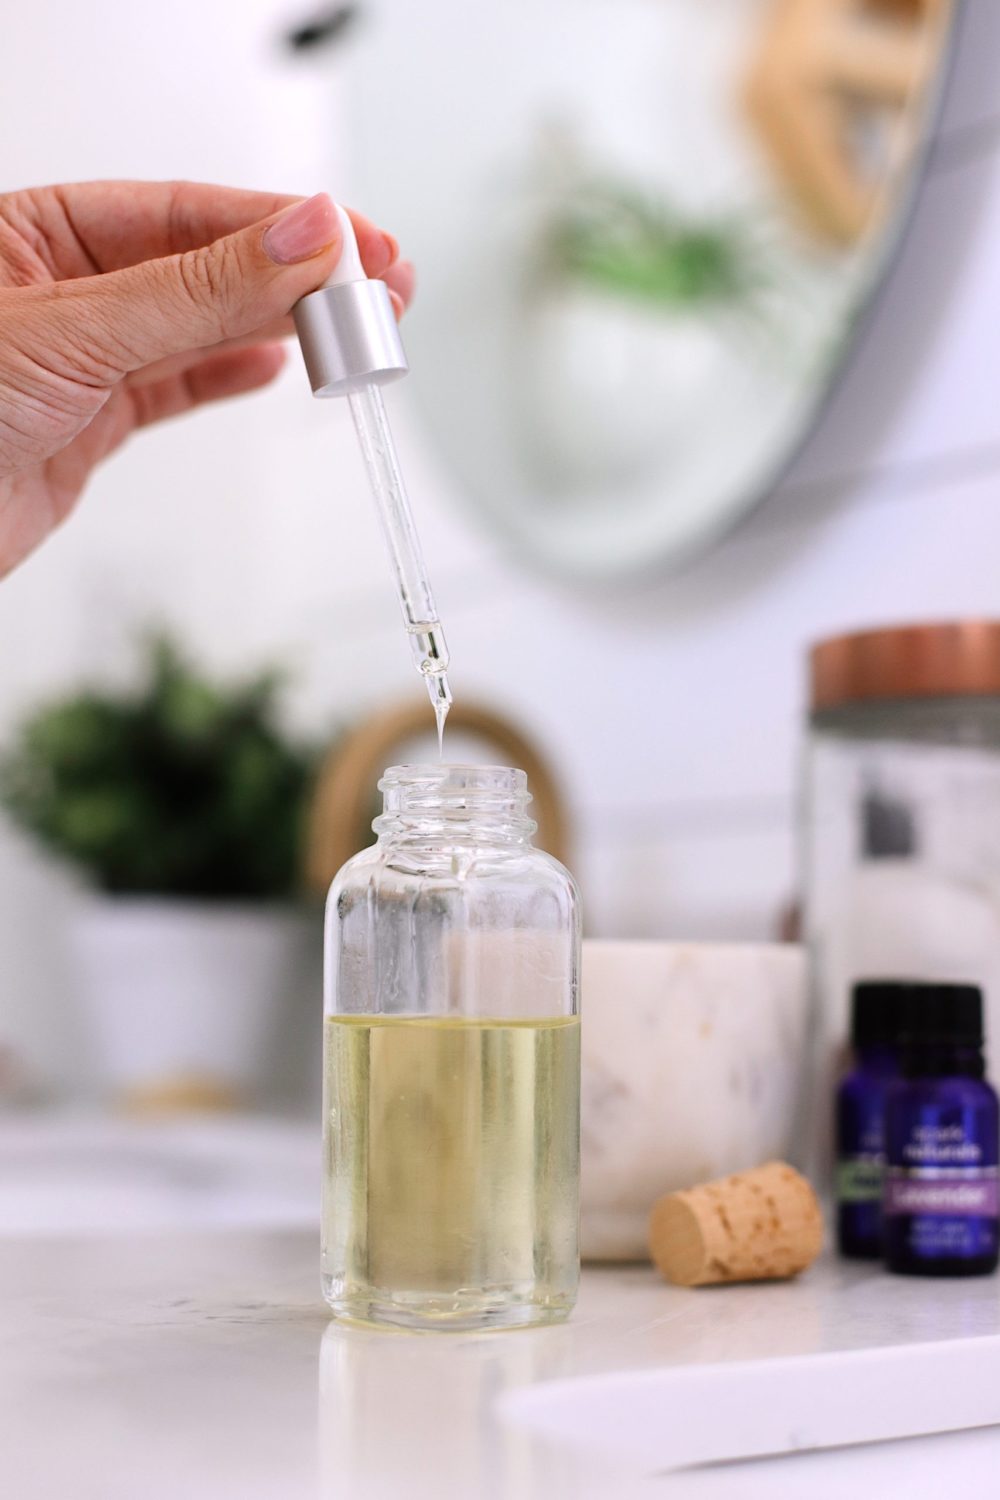 How to Use Blissful Essential Oils for Labor and Delivery